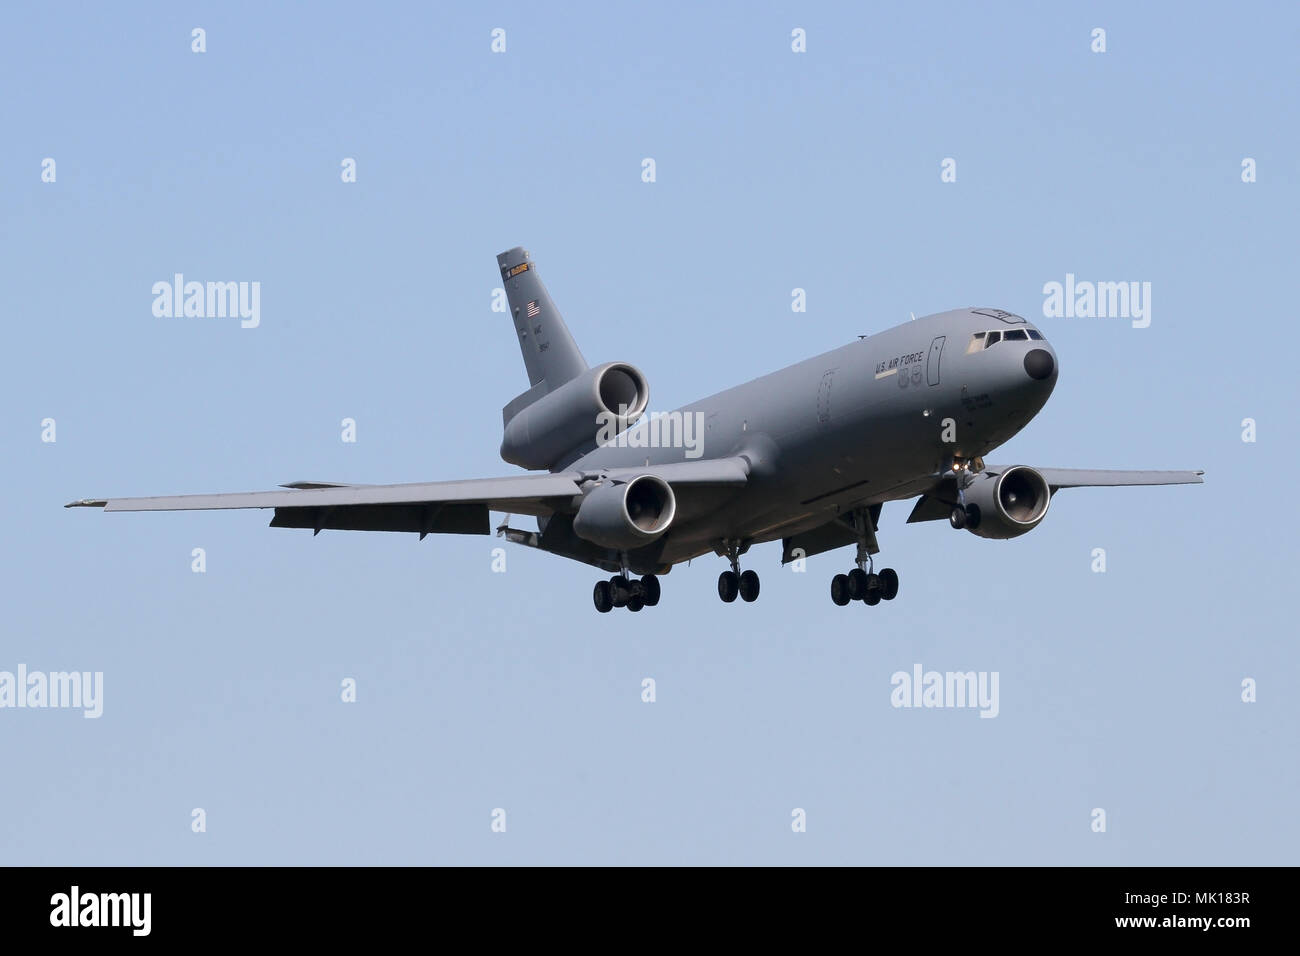 USAF KC-10A Extender from McGuire AFB on approach into RAF Mildenhall on a bright morning. Stock Photo